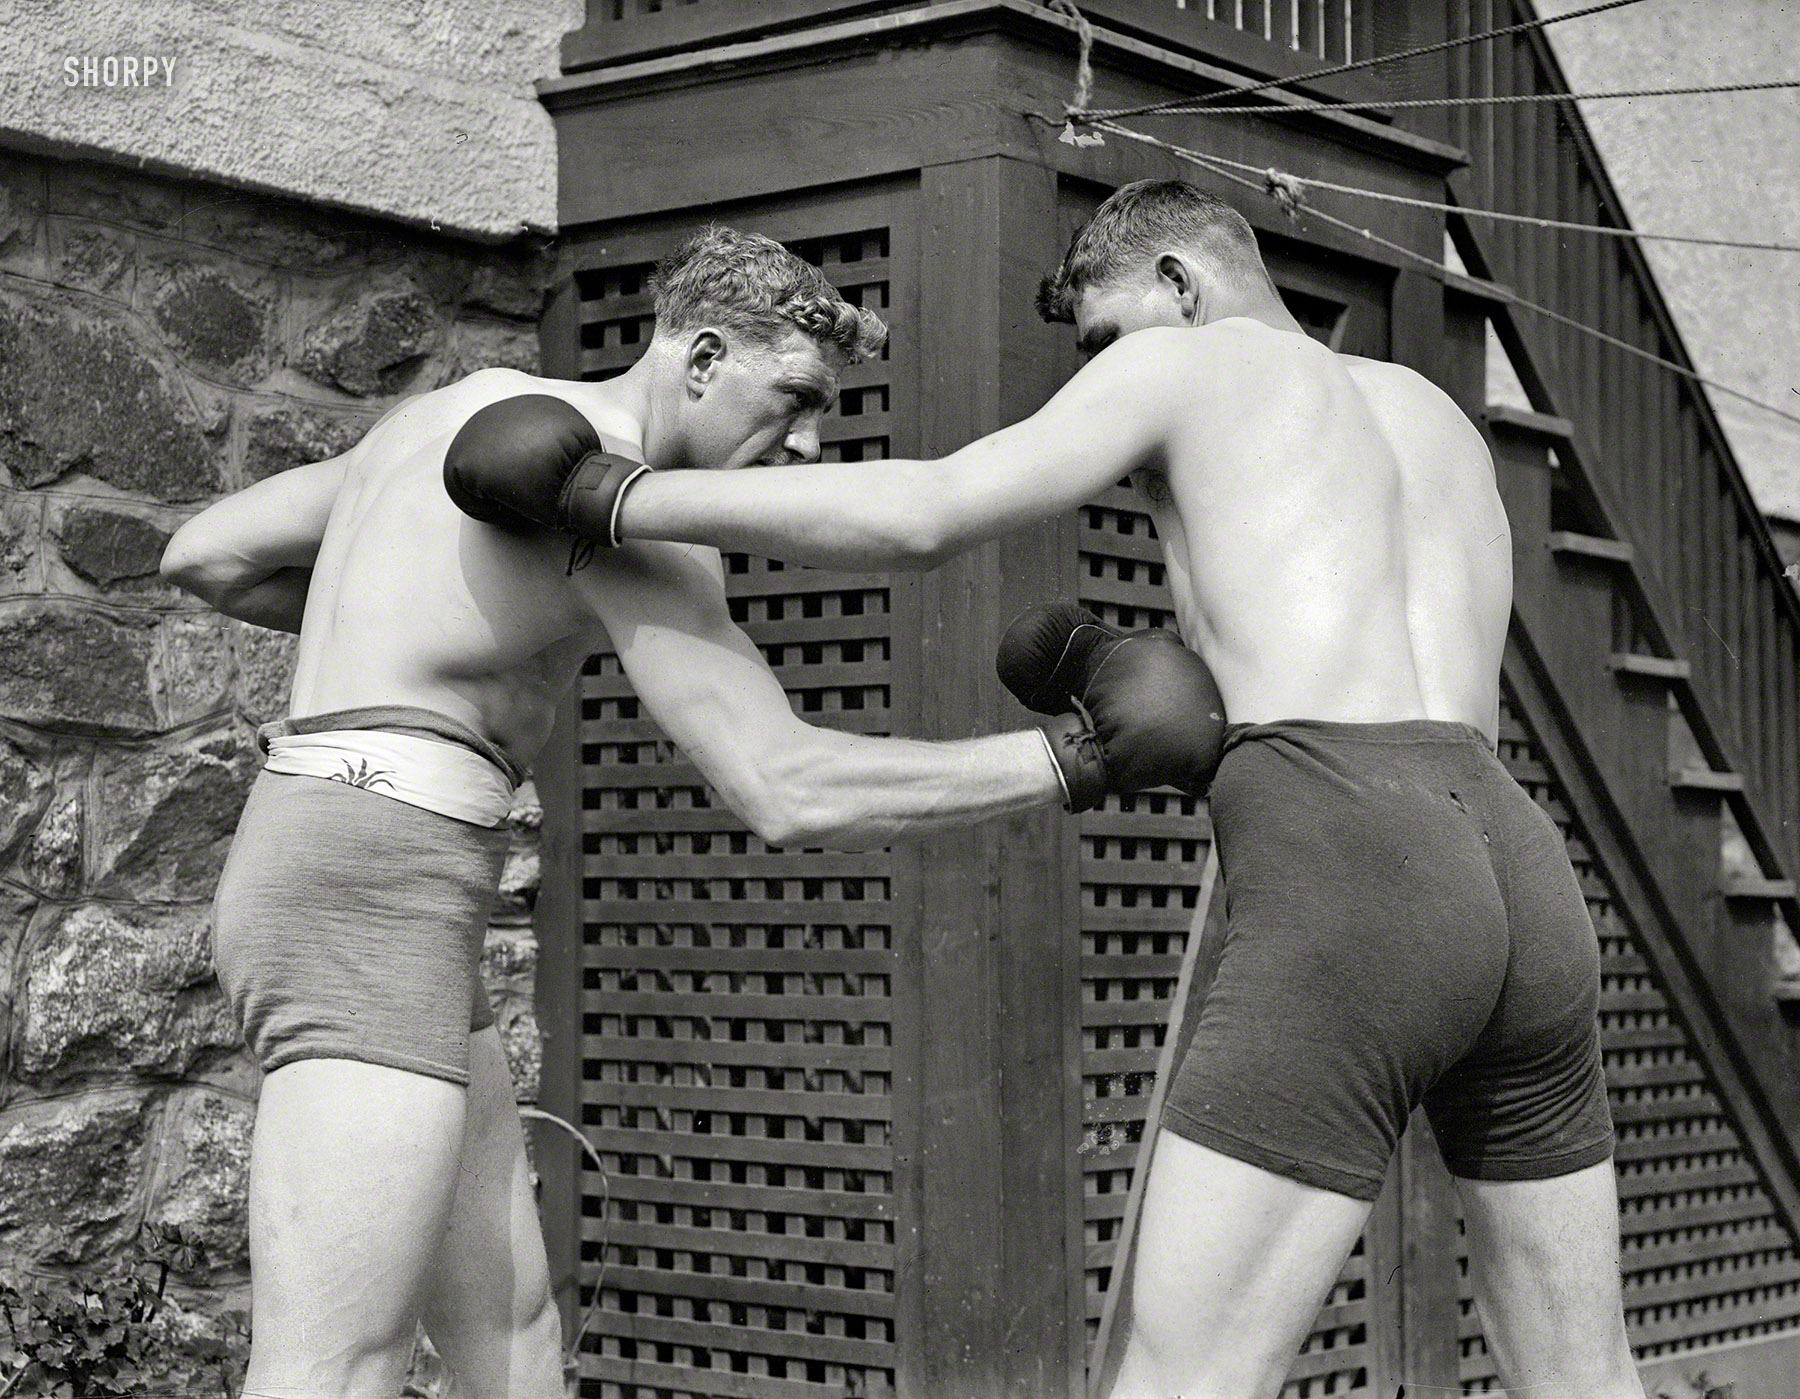 June 27, 1912. Rye, New York. "Wells & Coffey." English heavyweight champion "Bombardier" Billy Wells, left, sparring with Jim Coffey, the Roscommon Giant, to prepare for his fight with Al Palzer. Palzer won by a knockout in the third round. 5x7 glass negative, George Grantham Bain Collection. View full size.